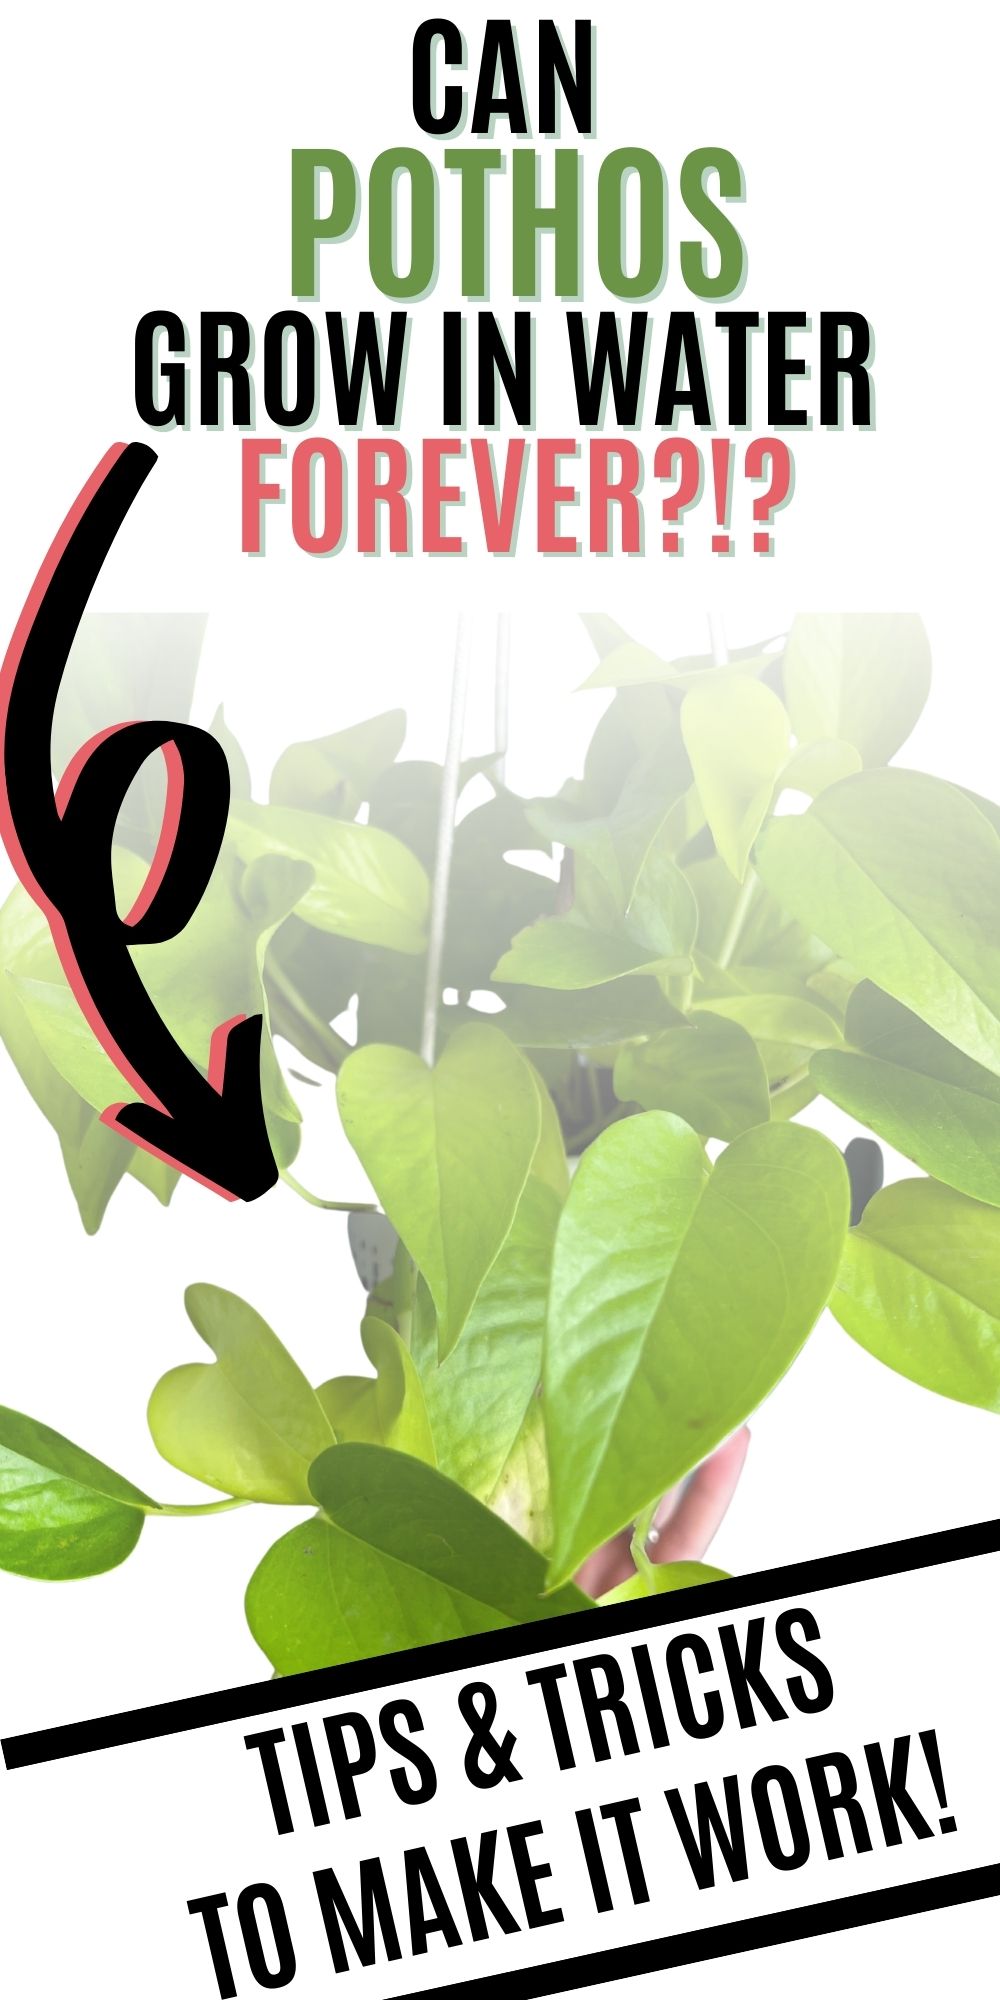 Can you grow pothos in water?